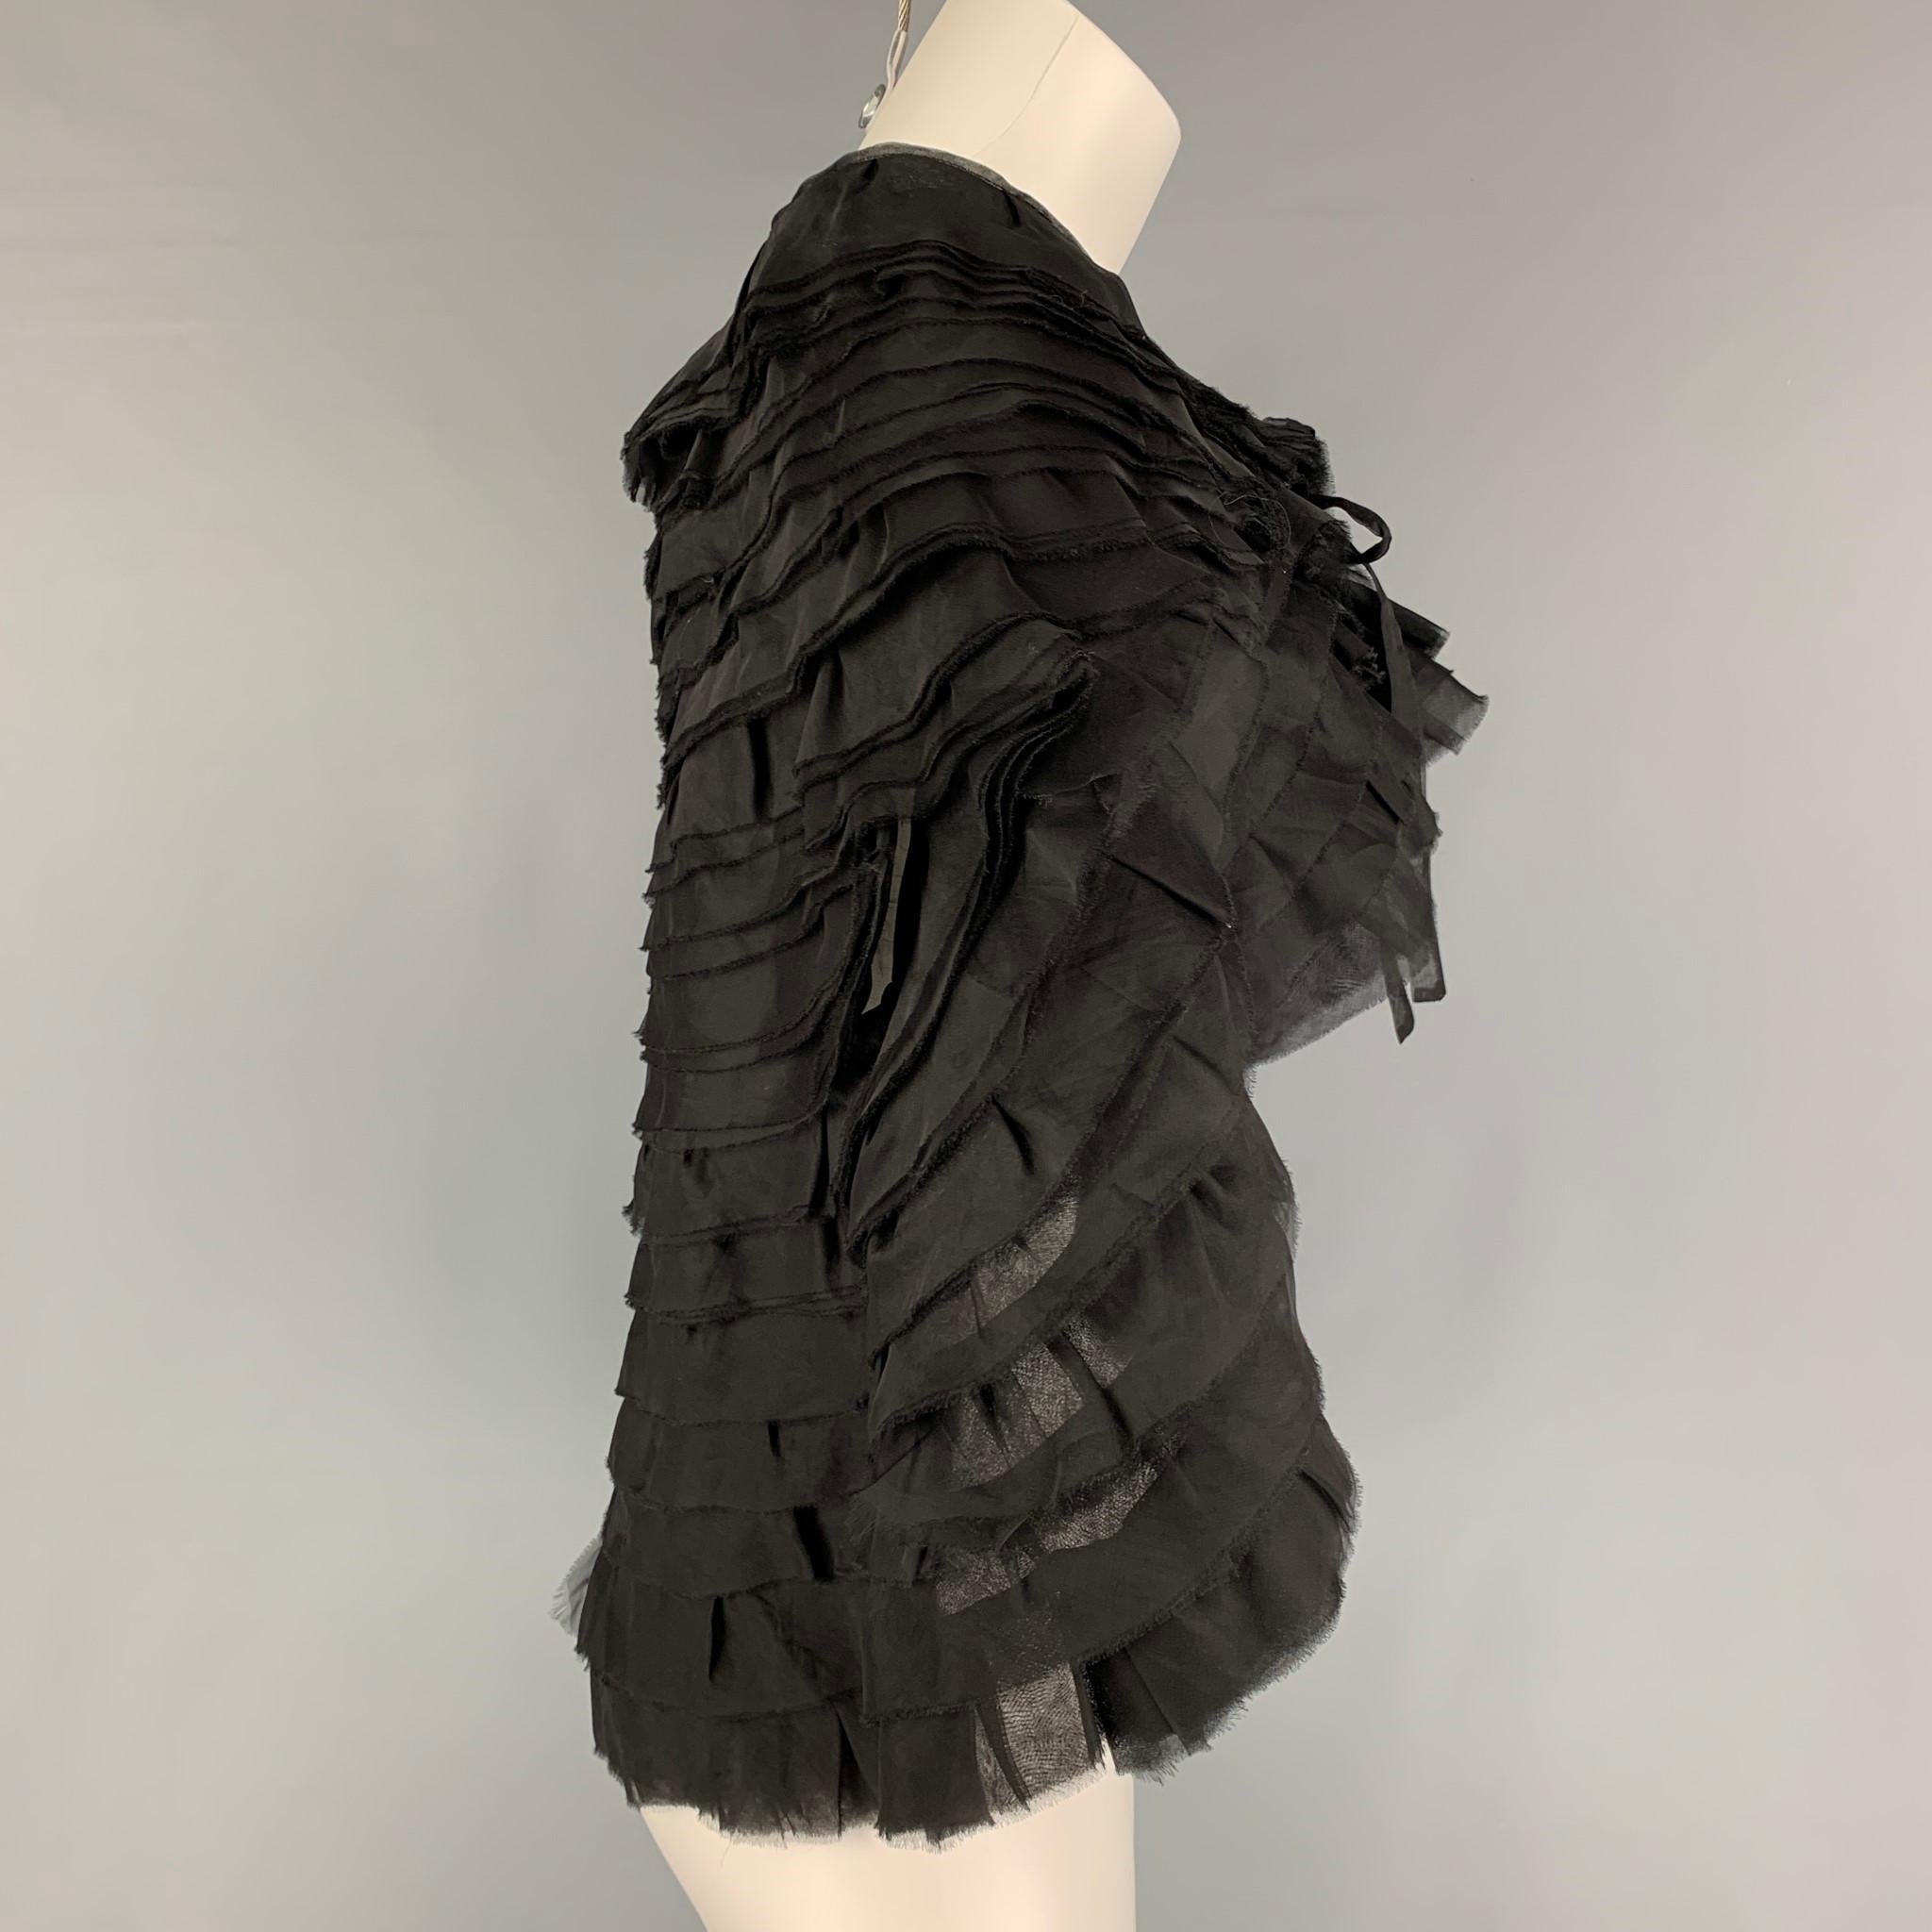 GIORGIO ARMANI cape comes in a black textured silk featuring a ruffled design and a self-tie closure. Made in Italy.

Very Good Pre-Owned Condition.
Marked: One Size

Measurements:

Shoulder: 18 in.
Length: 21.5 in. 